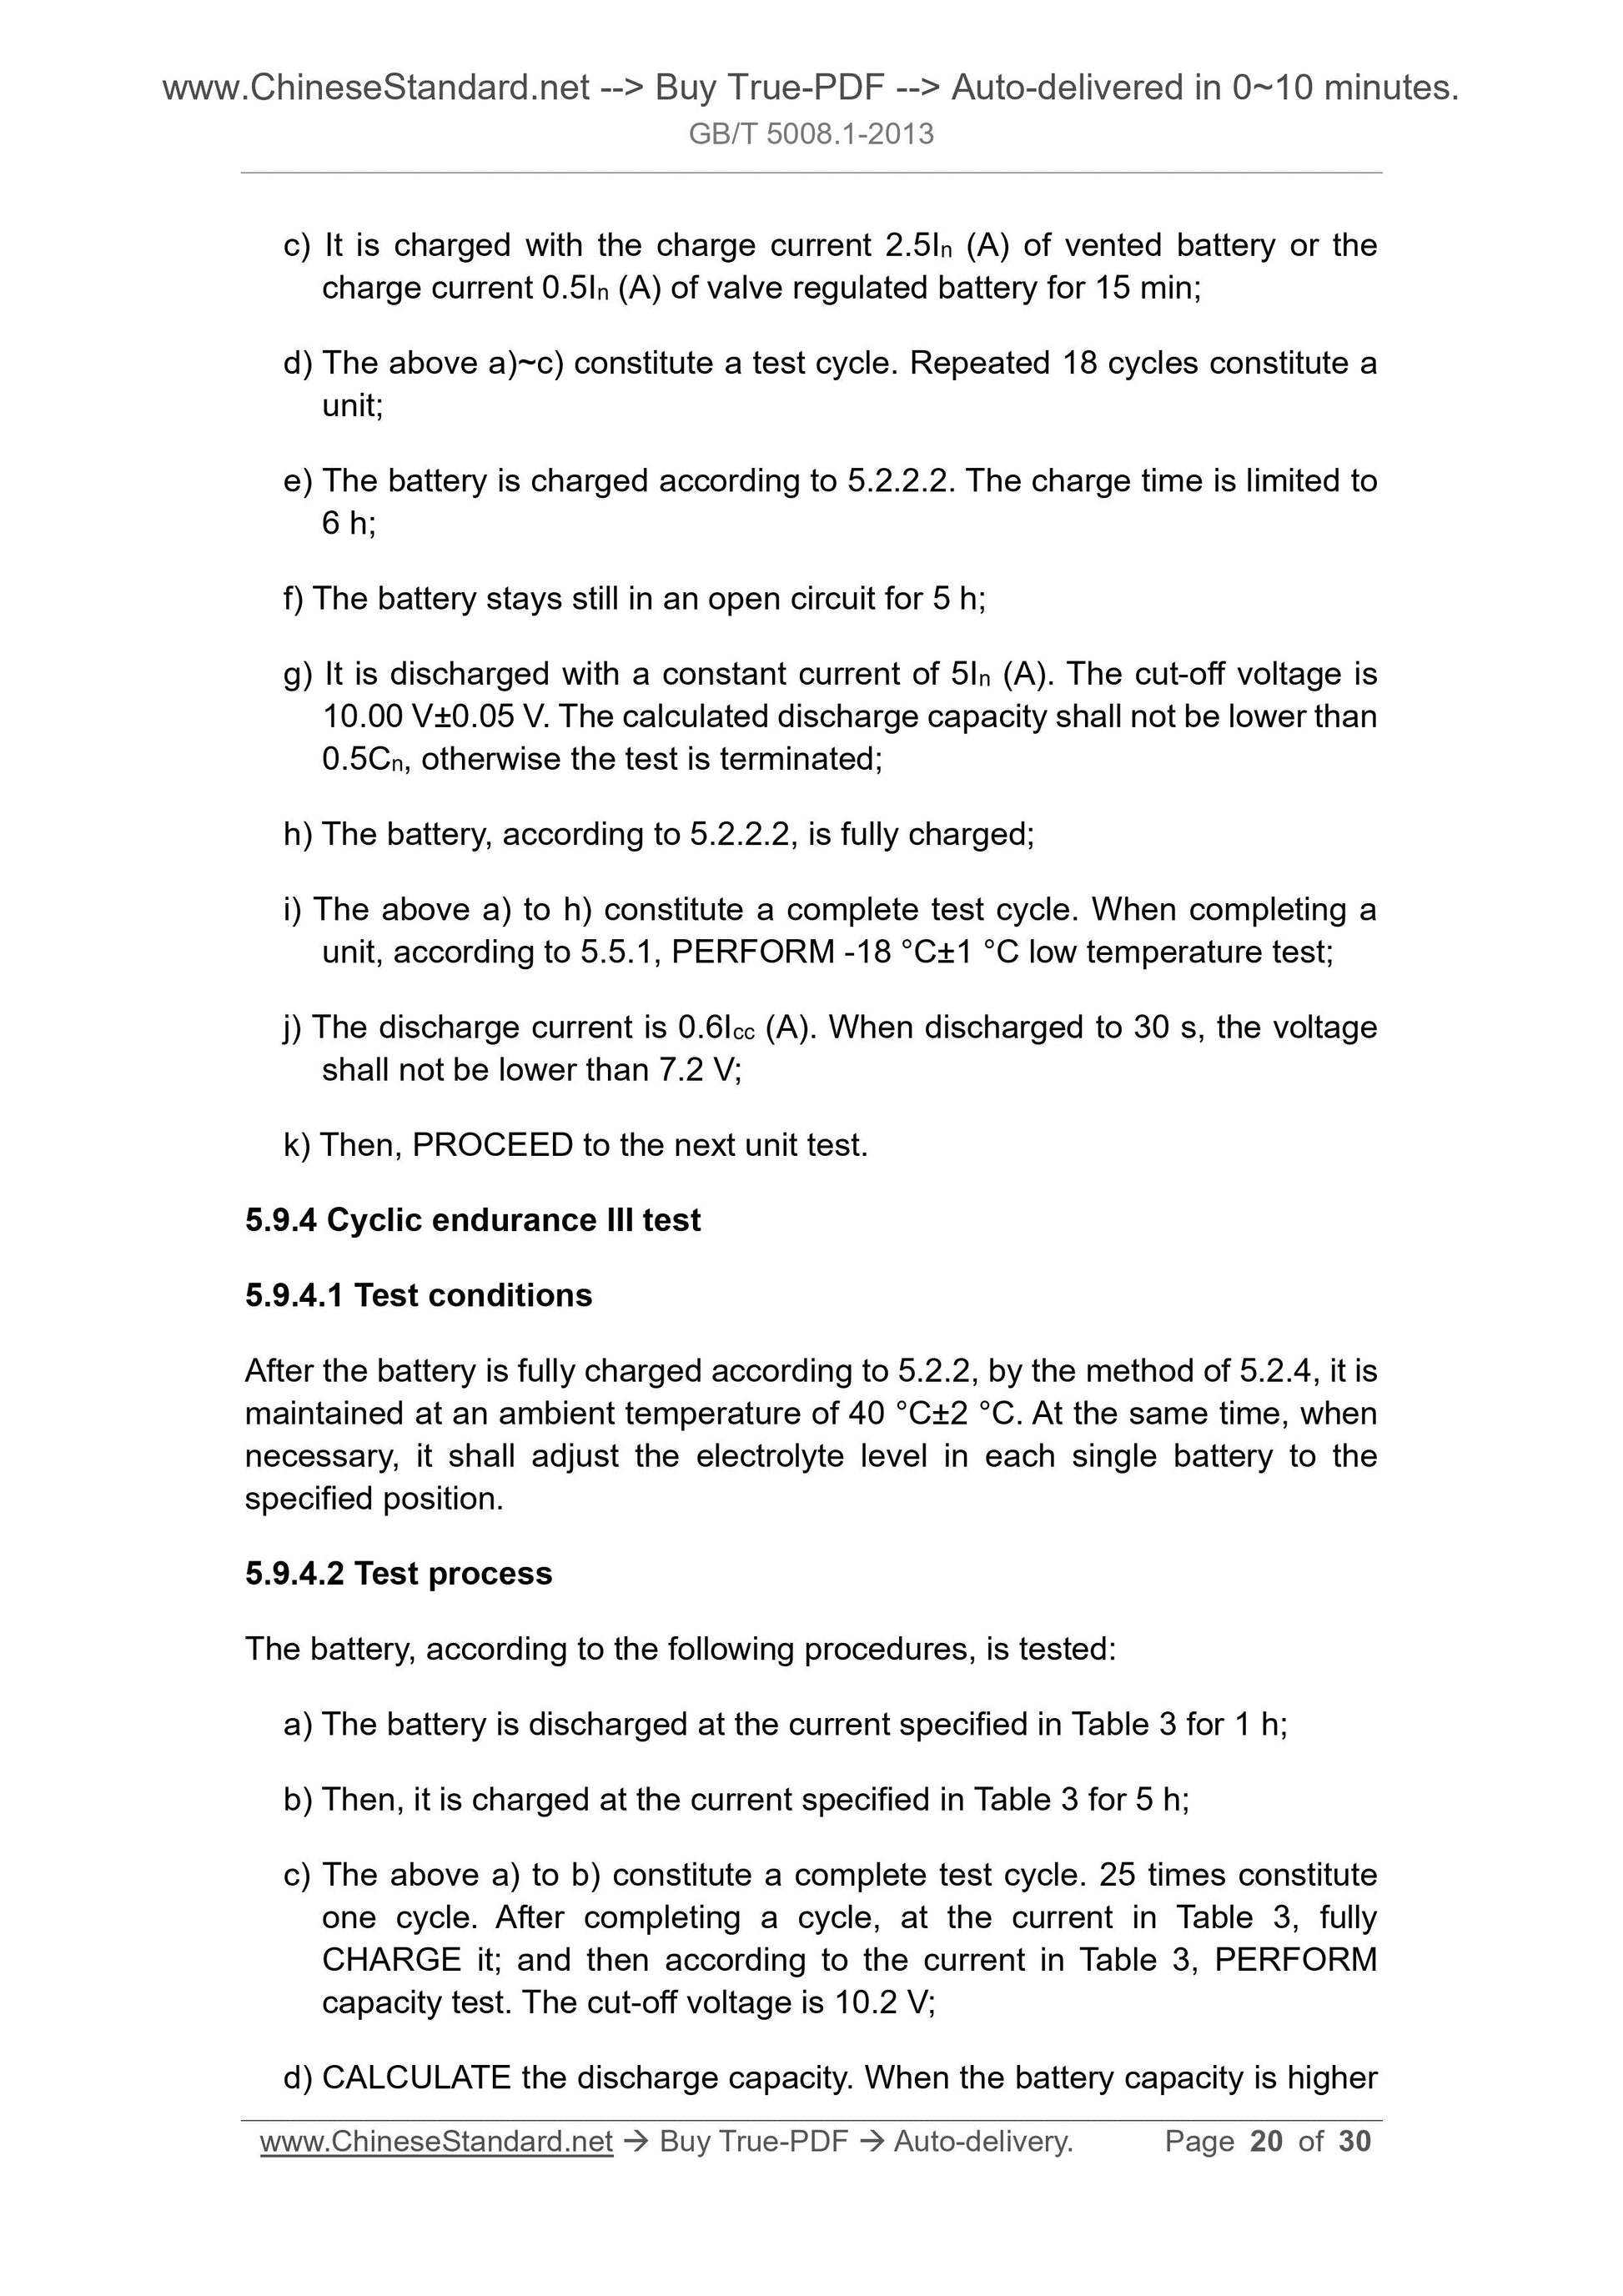 GB/T 5008.1-2013 Page 8